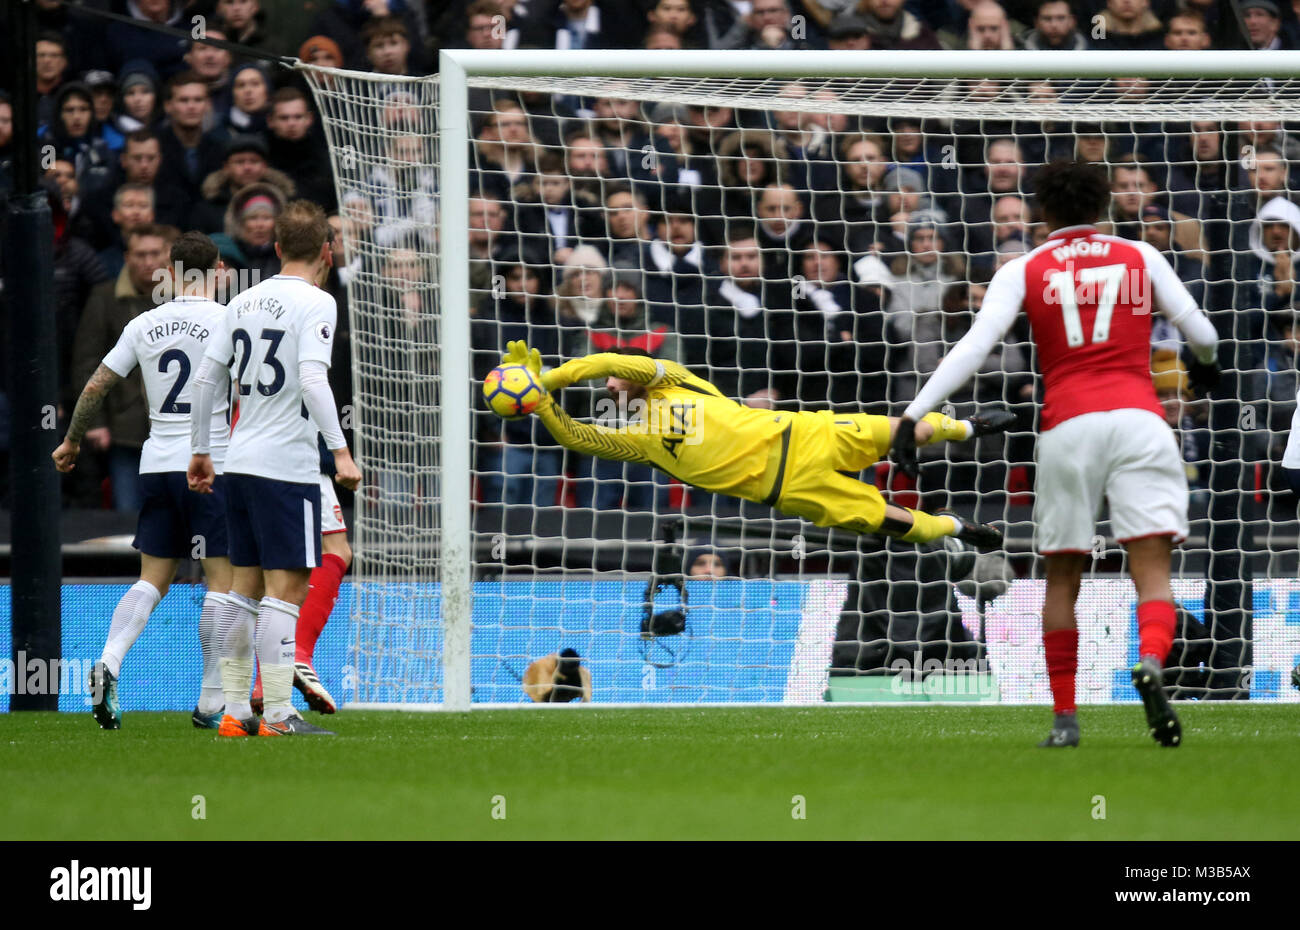 London, UK. 10th Feb, 2018. Hugo Lloris (TH) makes a save at the English Premier League football match between Tottenham Hotspur v Arsenal at Wembley Stadium, London, on February 10, 2018. **THIS PICTURE IS FOR EDITORIAL USE ONLY** Credit: Paul Marriott/Alamy Live News Stock Photo